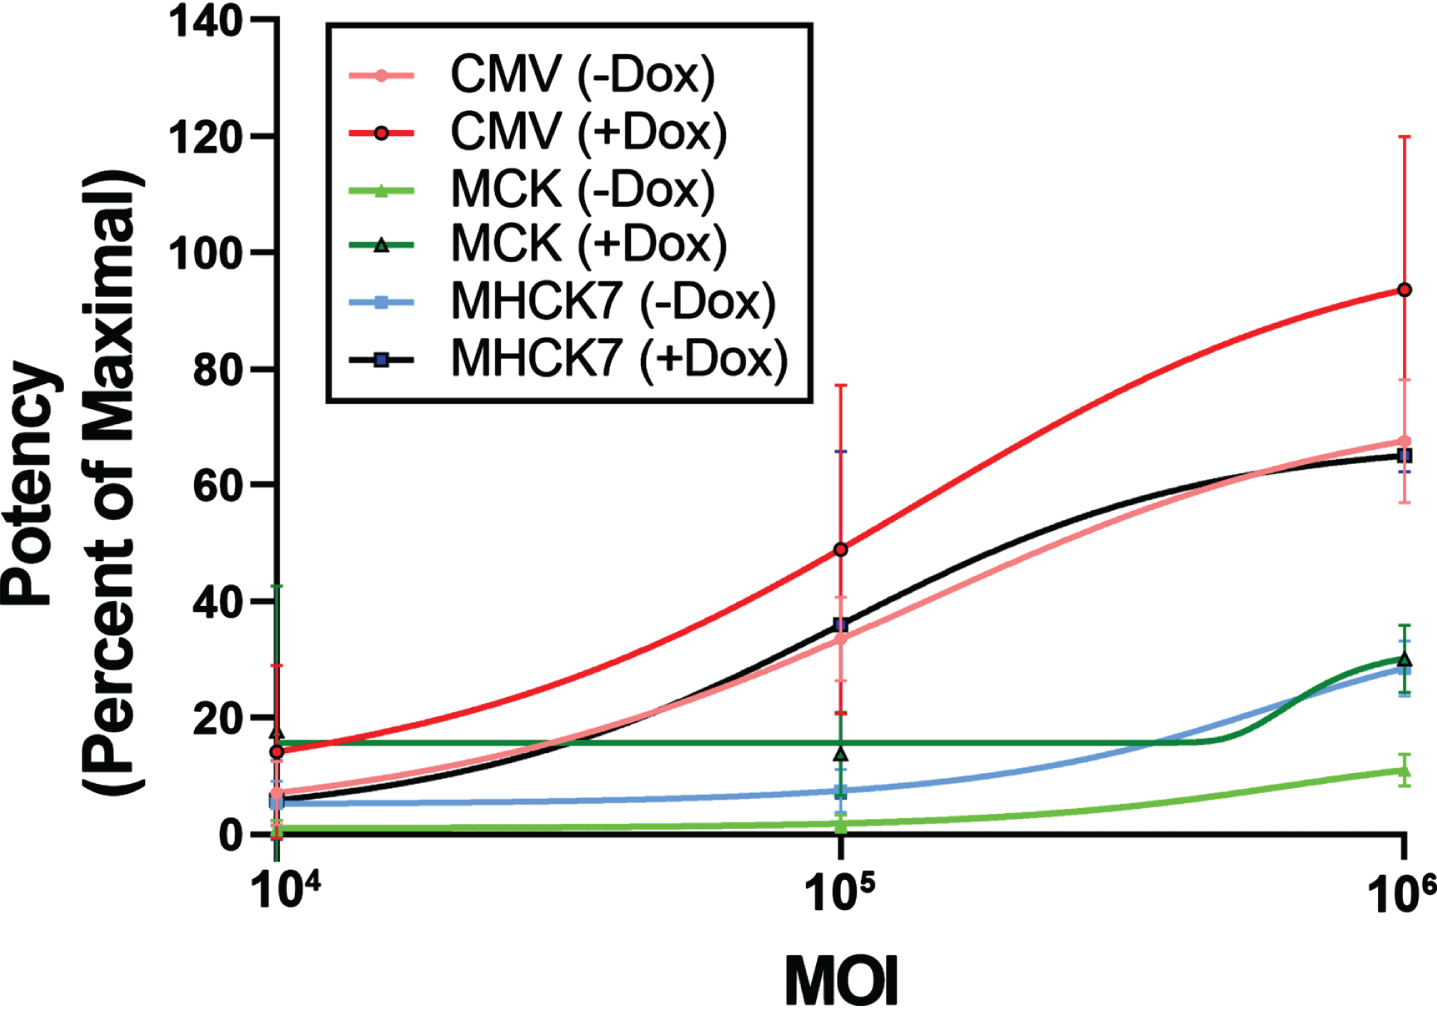 Potency assay of AAV vectors in Lec3MyoDI cells. AAV potency assays were done to compare promoters (CMV, MCK, or MHCK7) driving GNE expression for rAAVrh74 vectors in Lec3MyoDI cells with or without doxycycline (Dox). Errors are SD for n = 4/group.